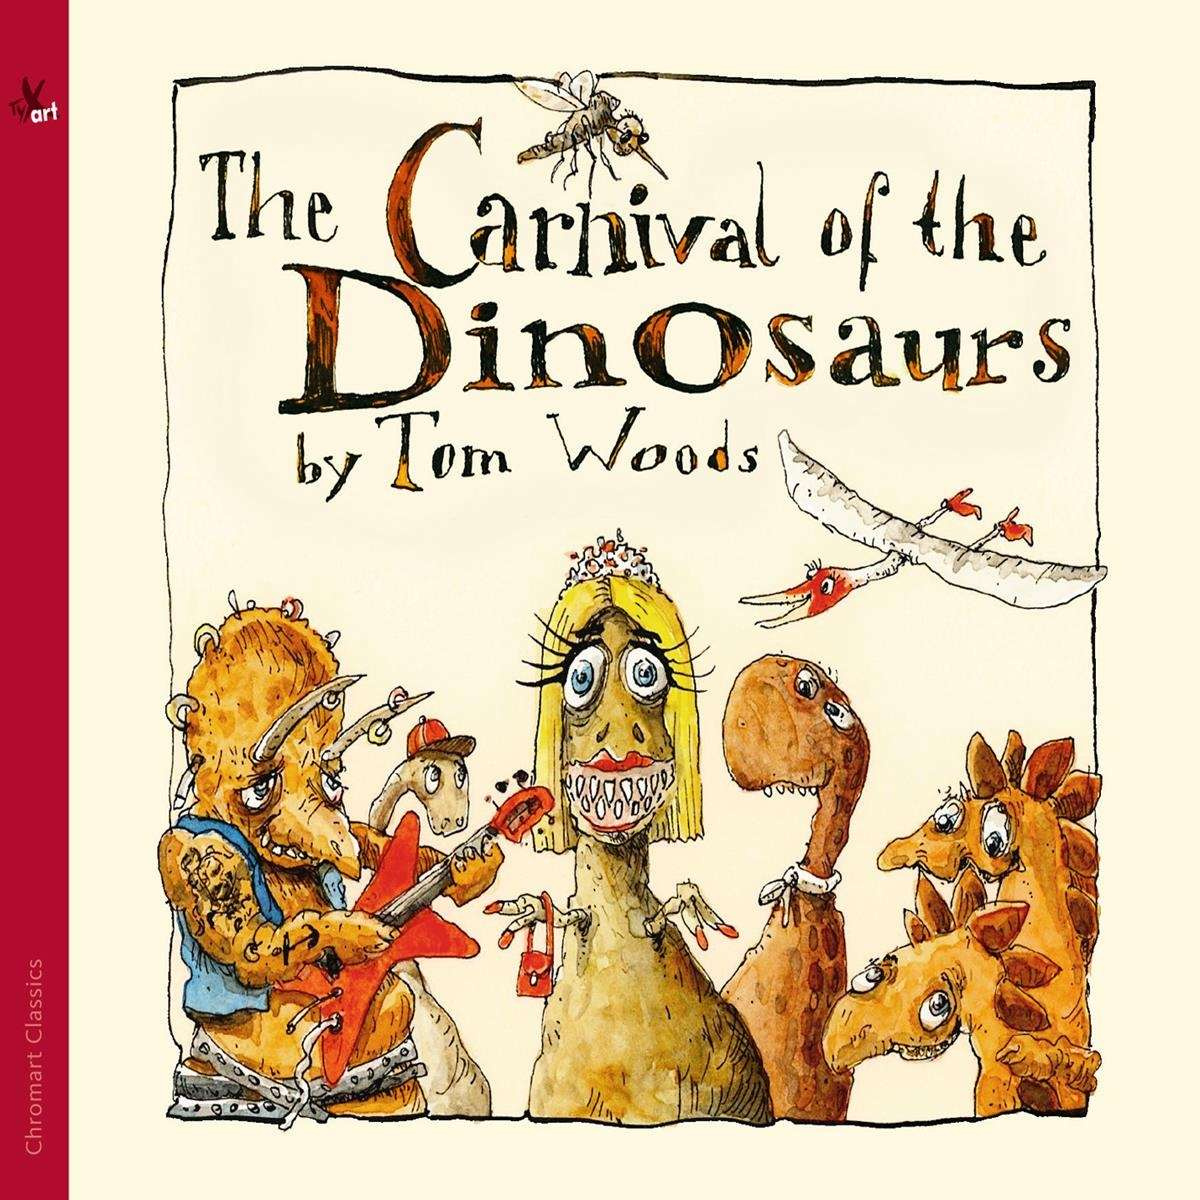 WOODS: THE CARNIVAL OF THE DINOSAURS (A MUSICAL FAIRYTALE)